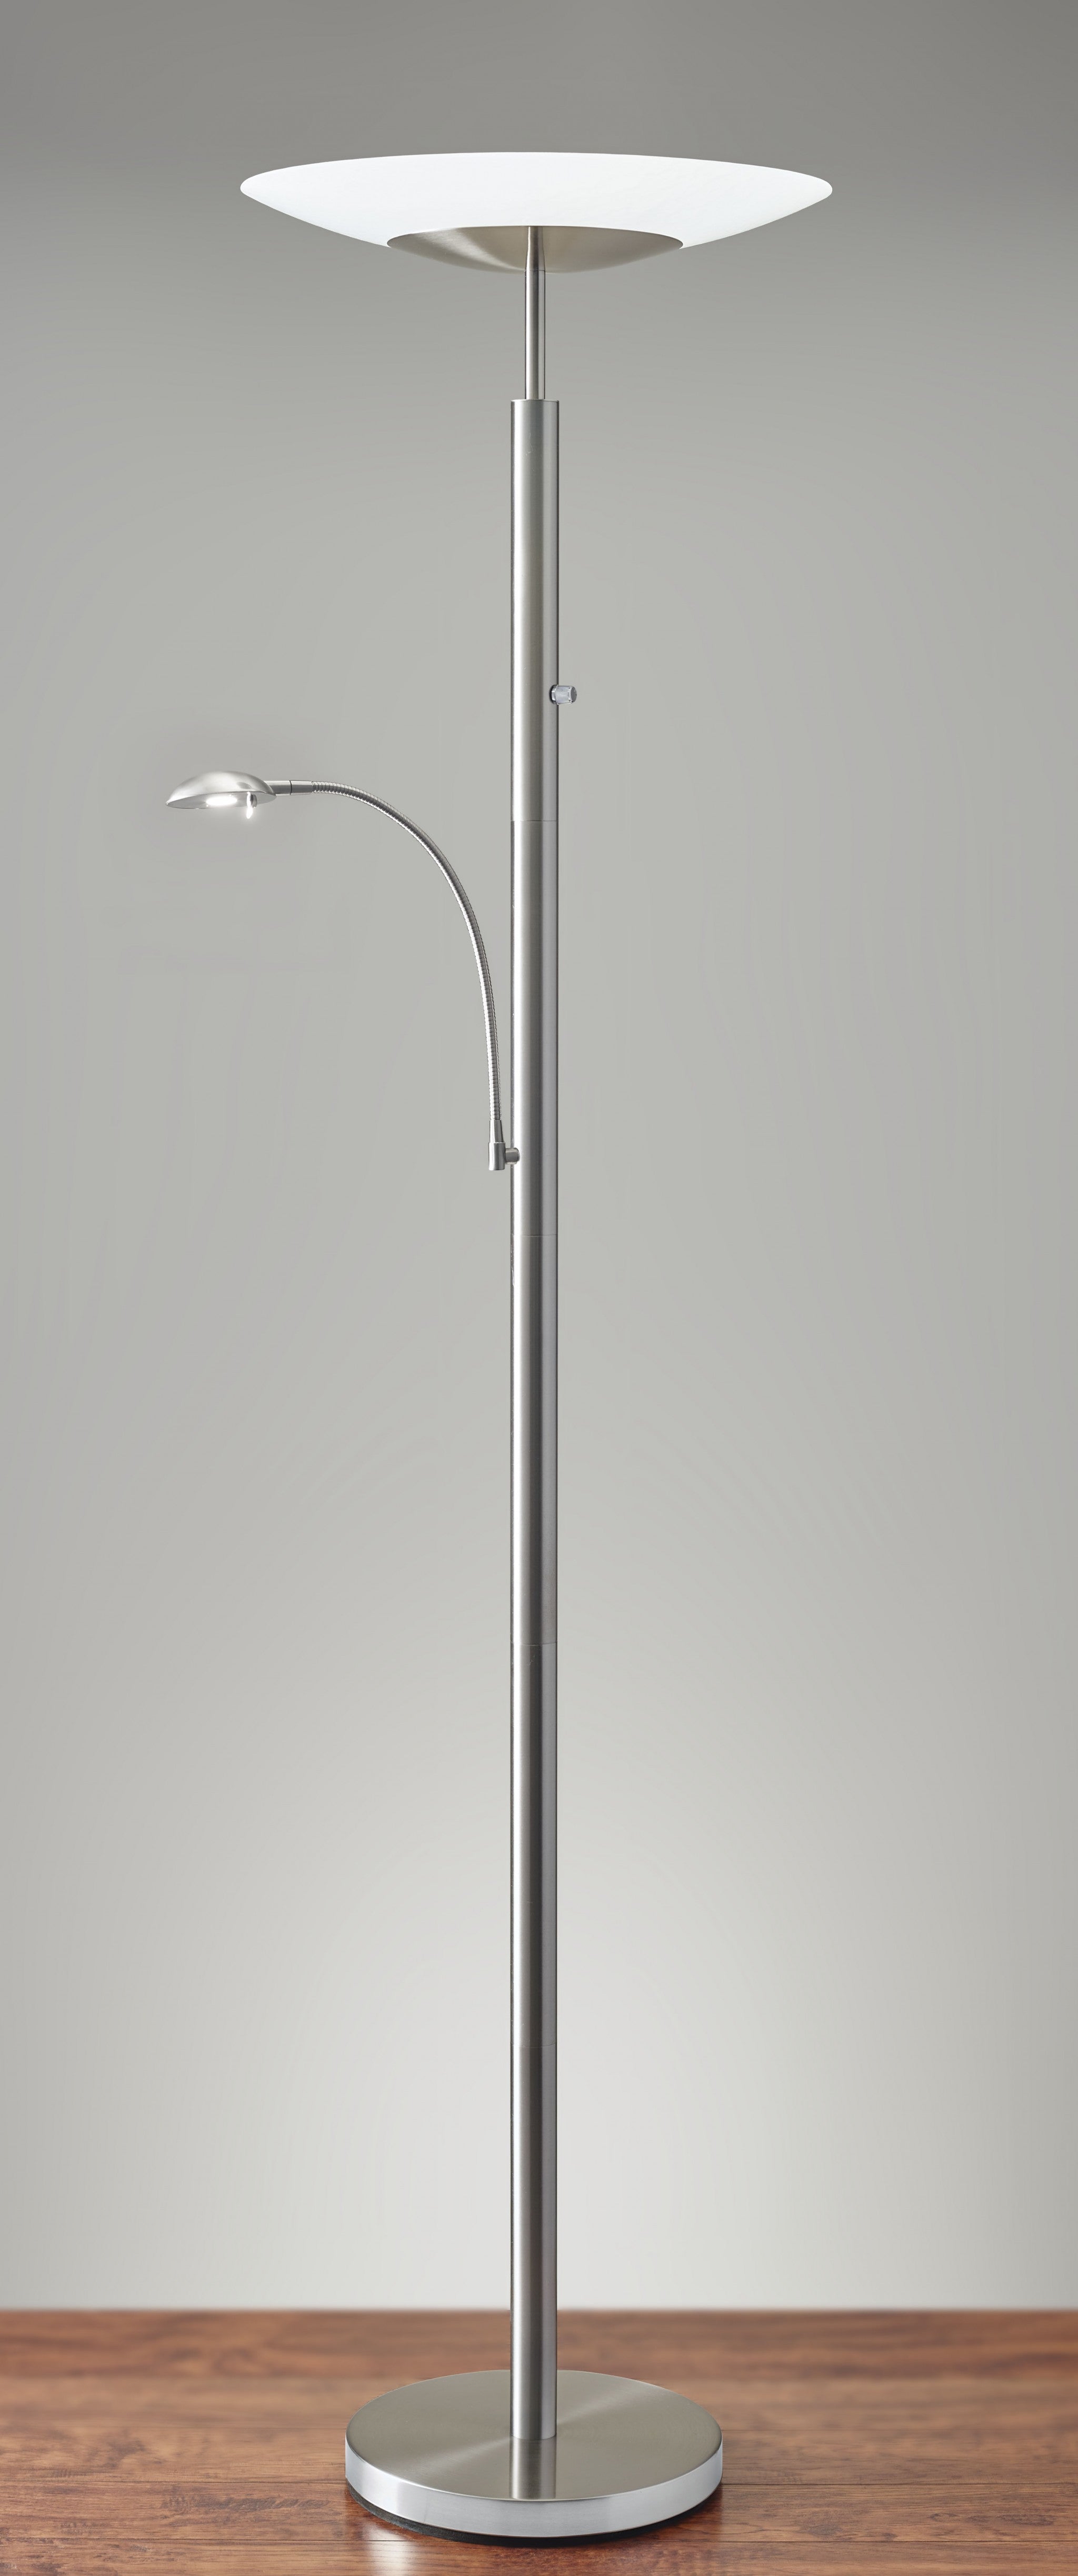 72" Steel Two Light Led Torchiere Floor Lamp With White Solid Color Cone Shade